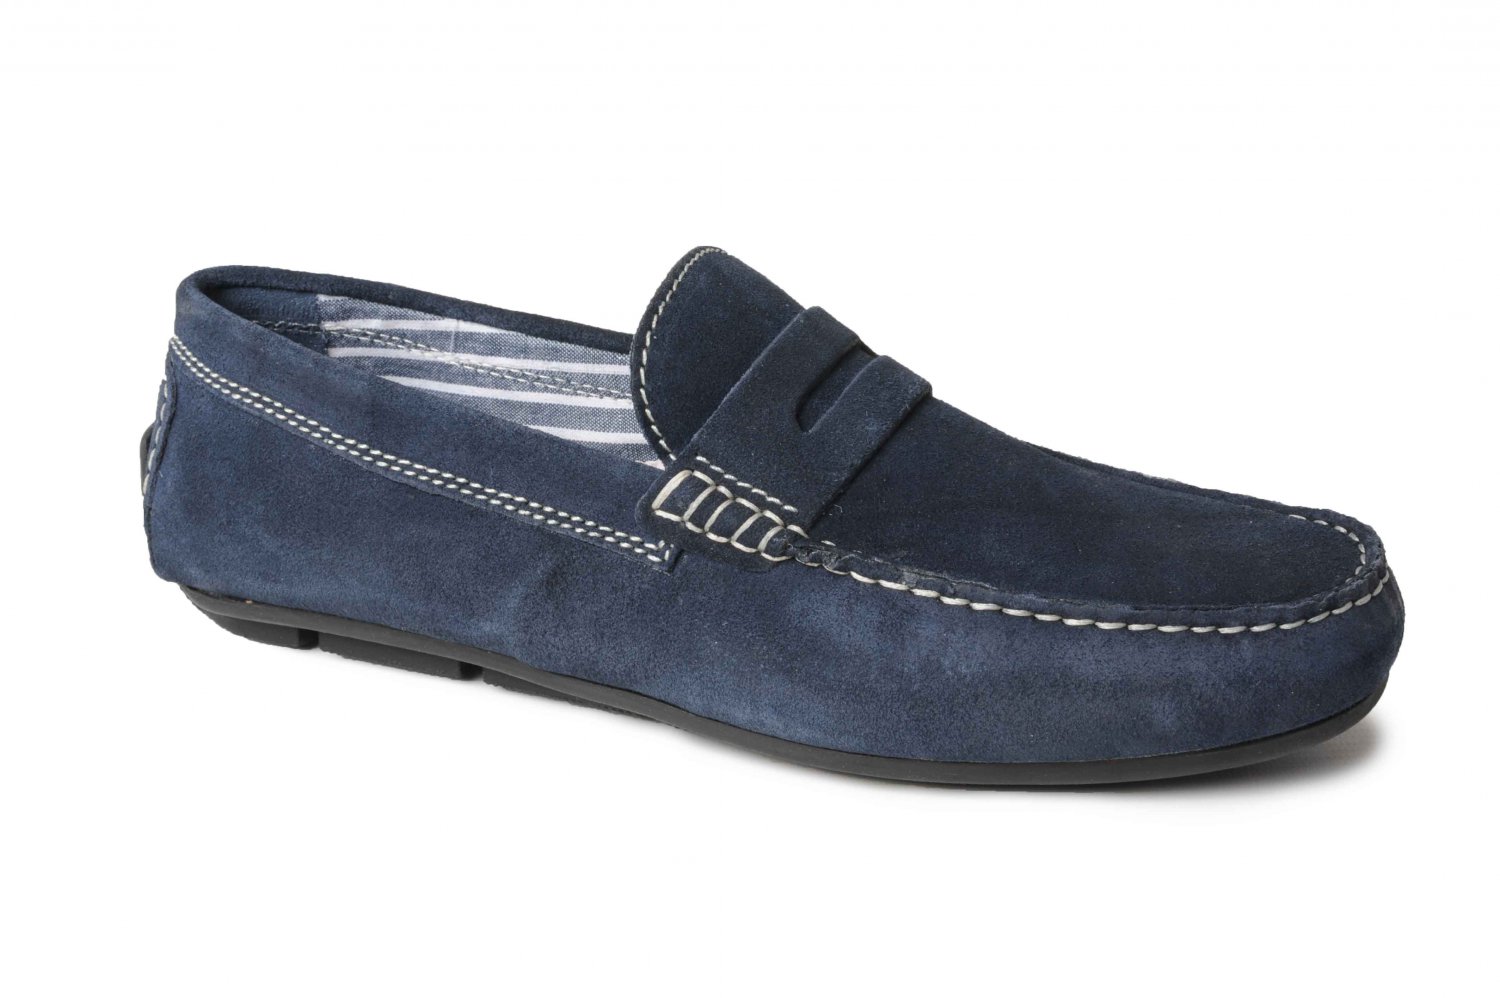 Catesby Men's Suede Leather Moccasin Driving Loafers I Navy Blue